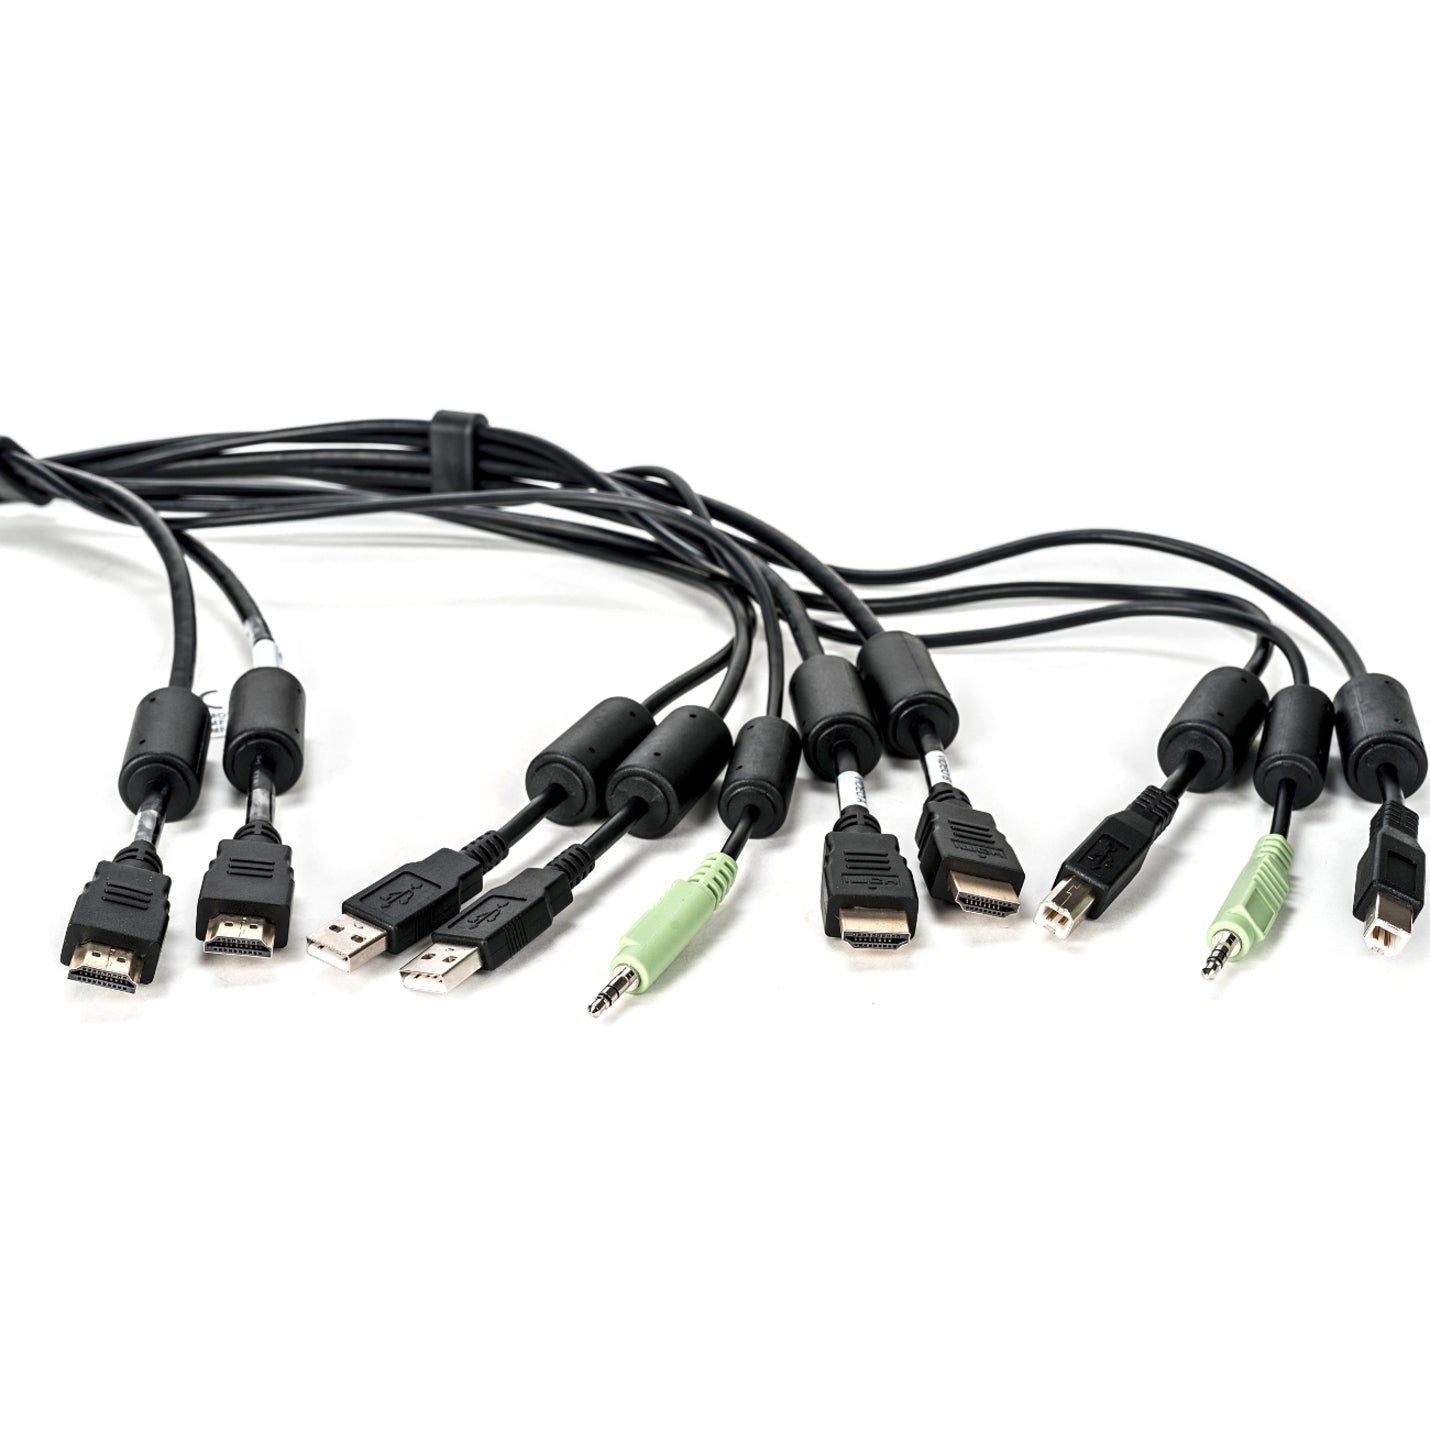 AVOCENT CBL0116 KVM Cable, Dual HDMI and Audio, 6 ft. for Vertiv Avocent SV and SC Series Switches